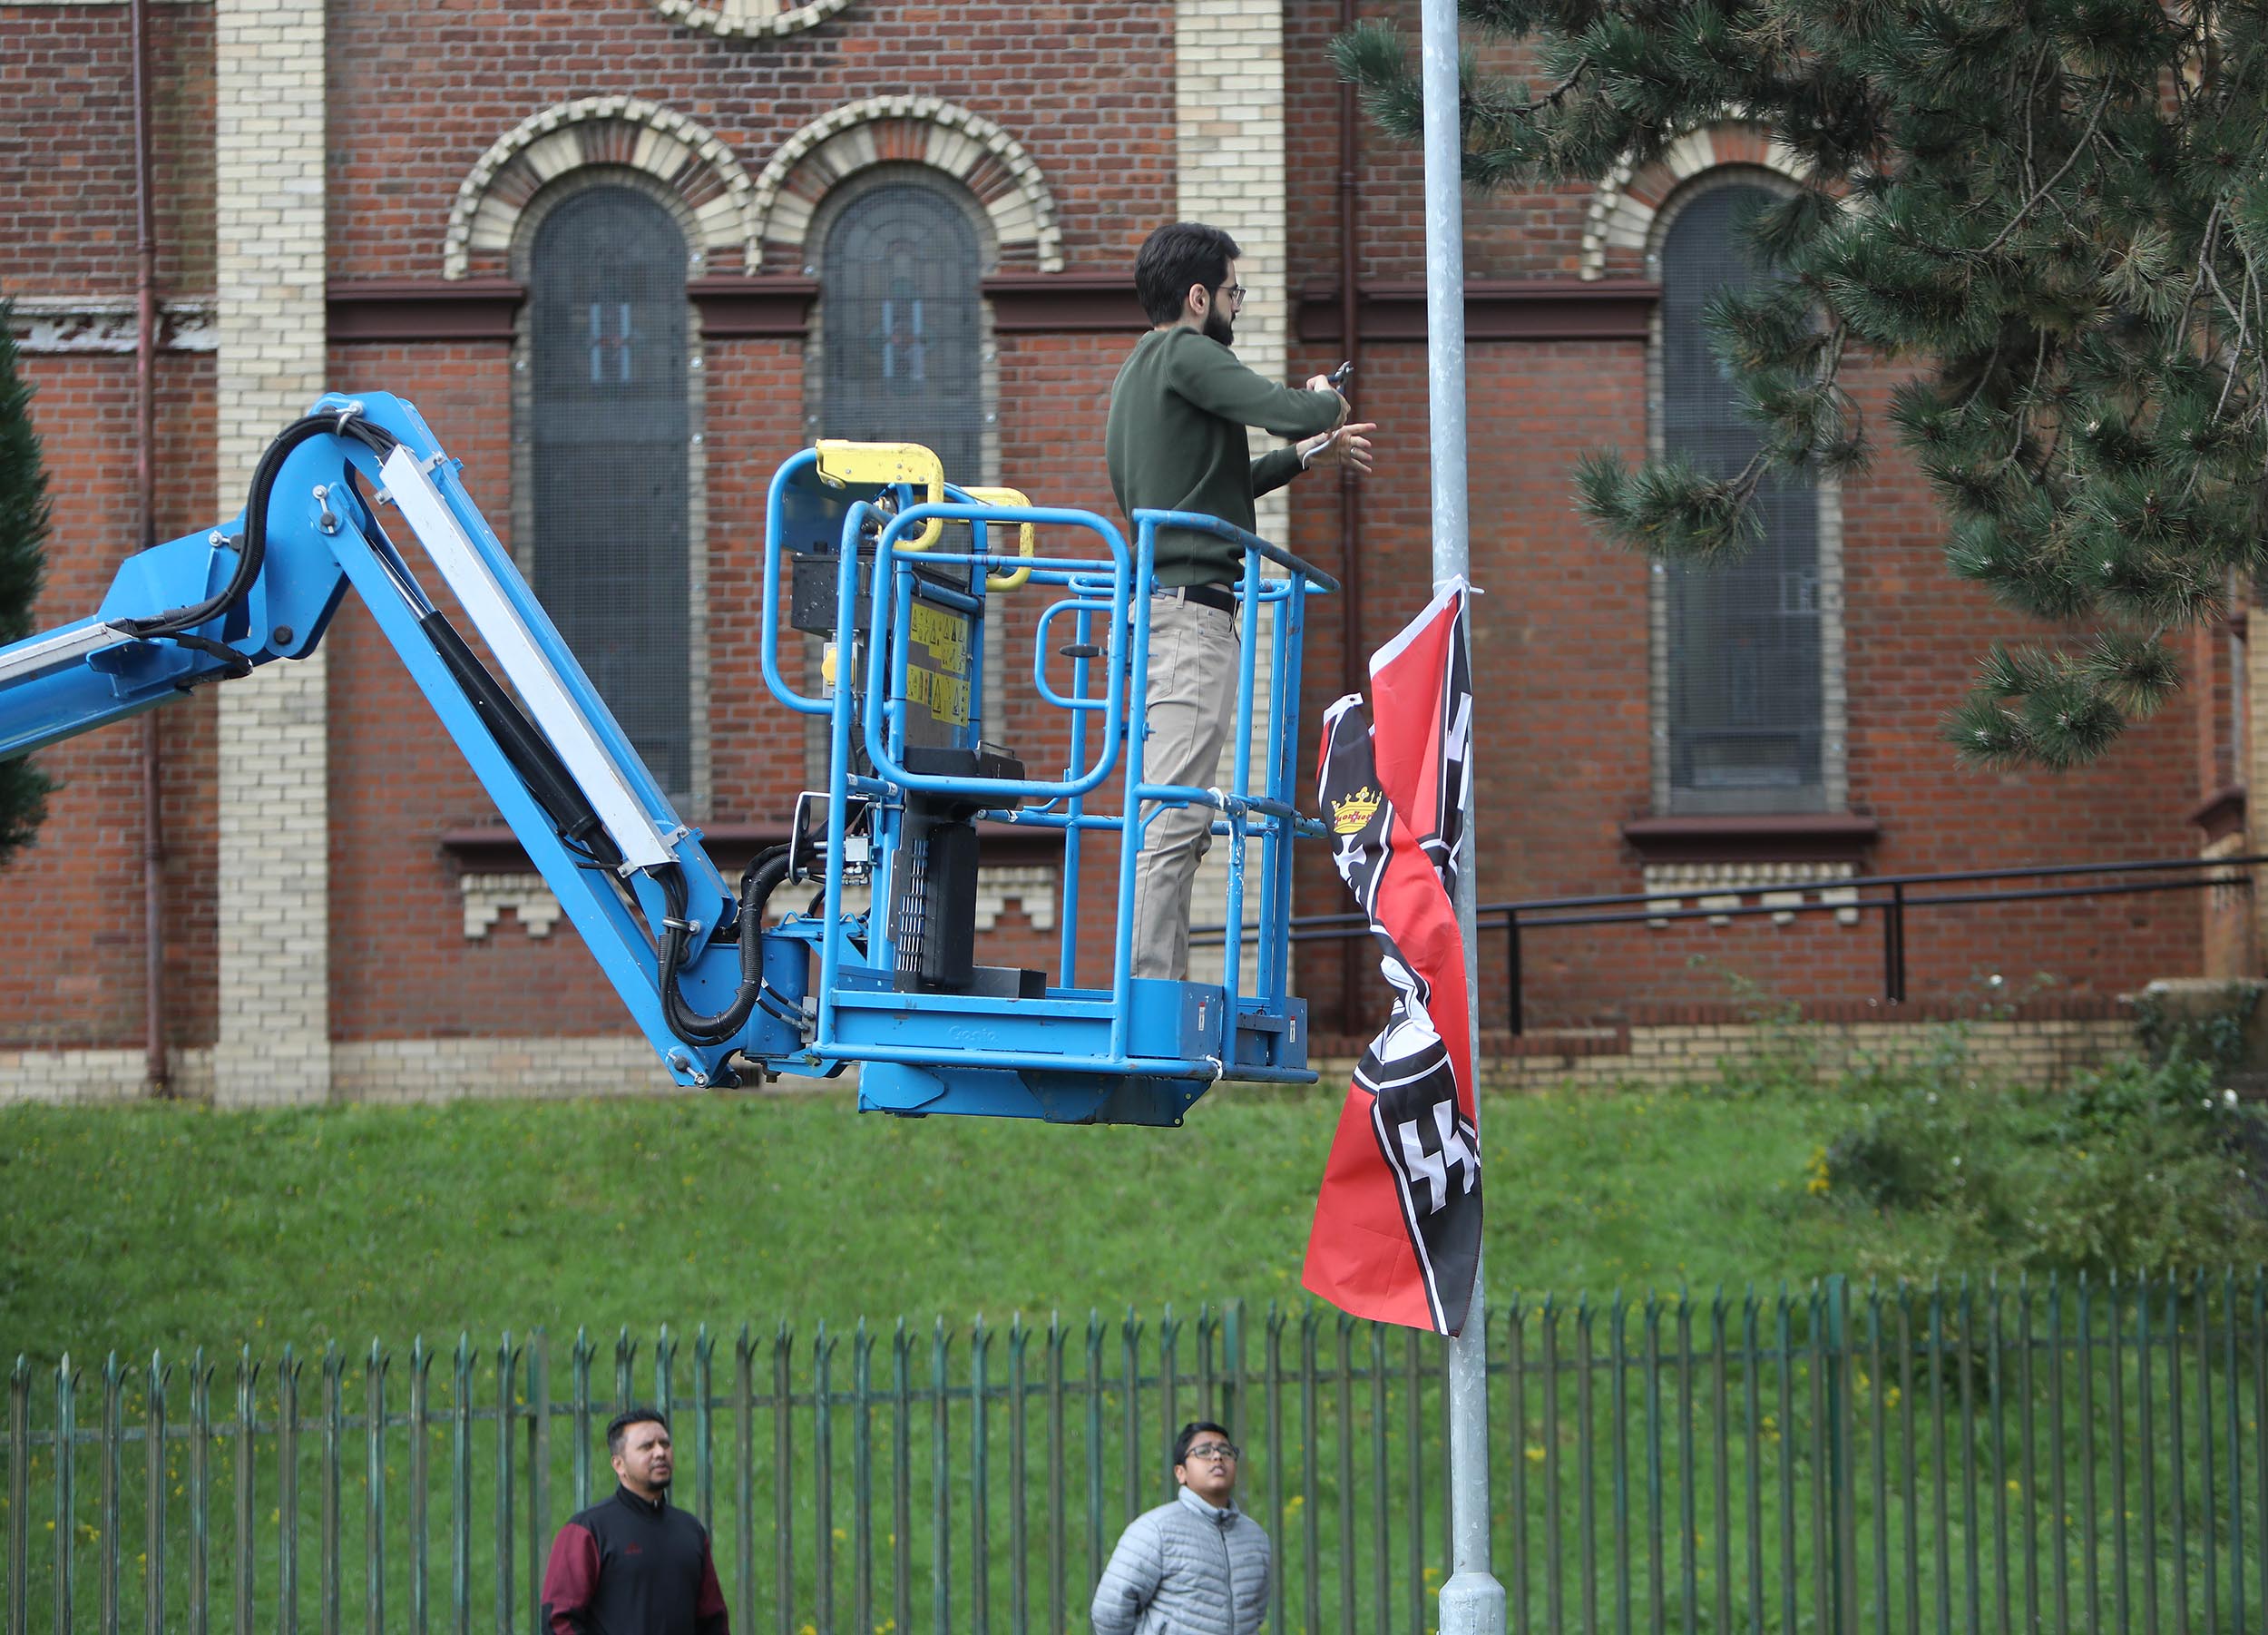 RACE HATE: The three fascist flags featuring Nazi symbols were erected last night. Above a member of the Mosque removes them.